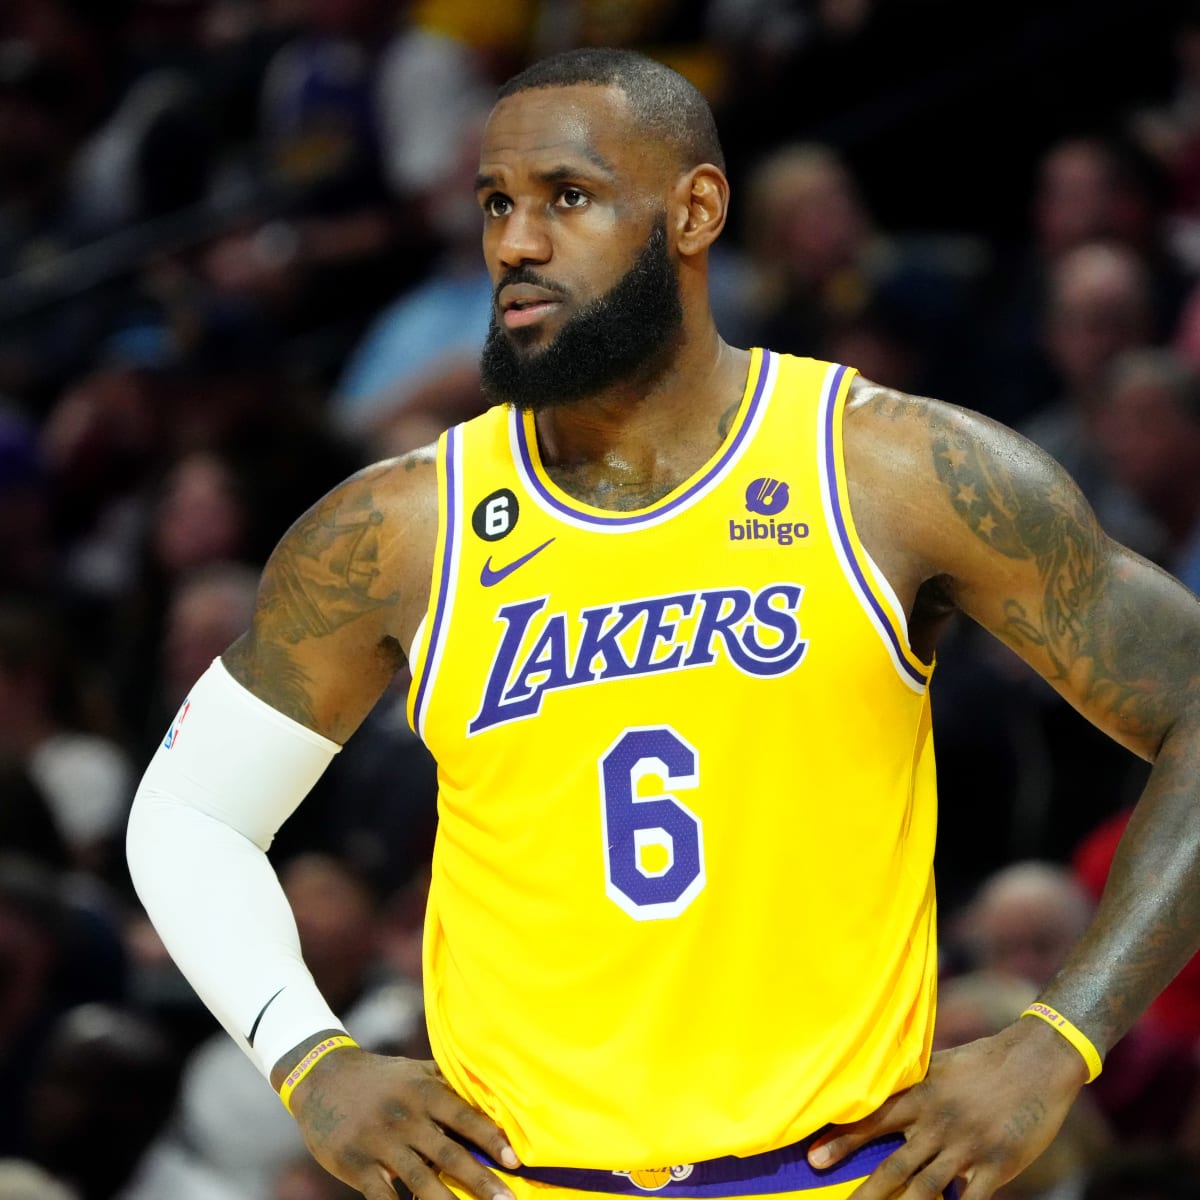 NBA 2021: LeBron James, Los Angeles Lakers, jersey number, No 6, No 23, why  did he change numbers?